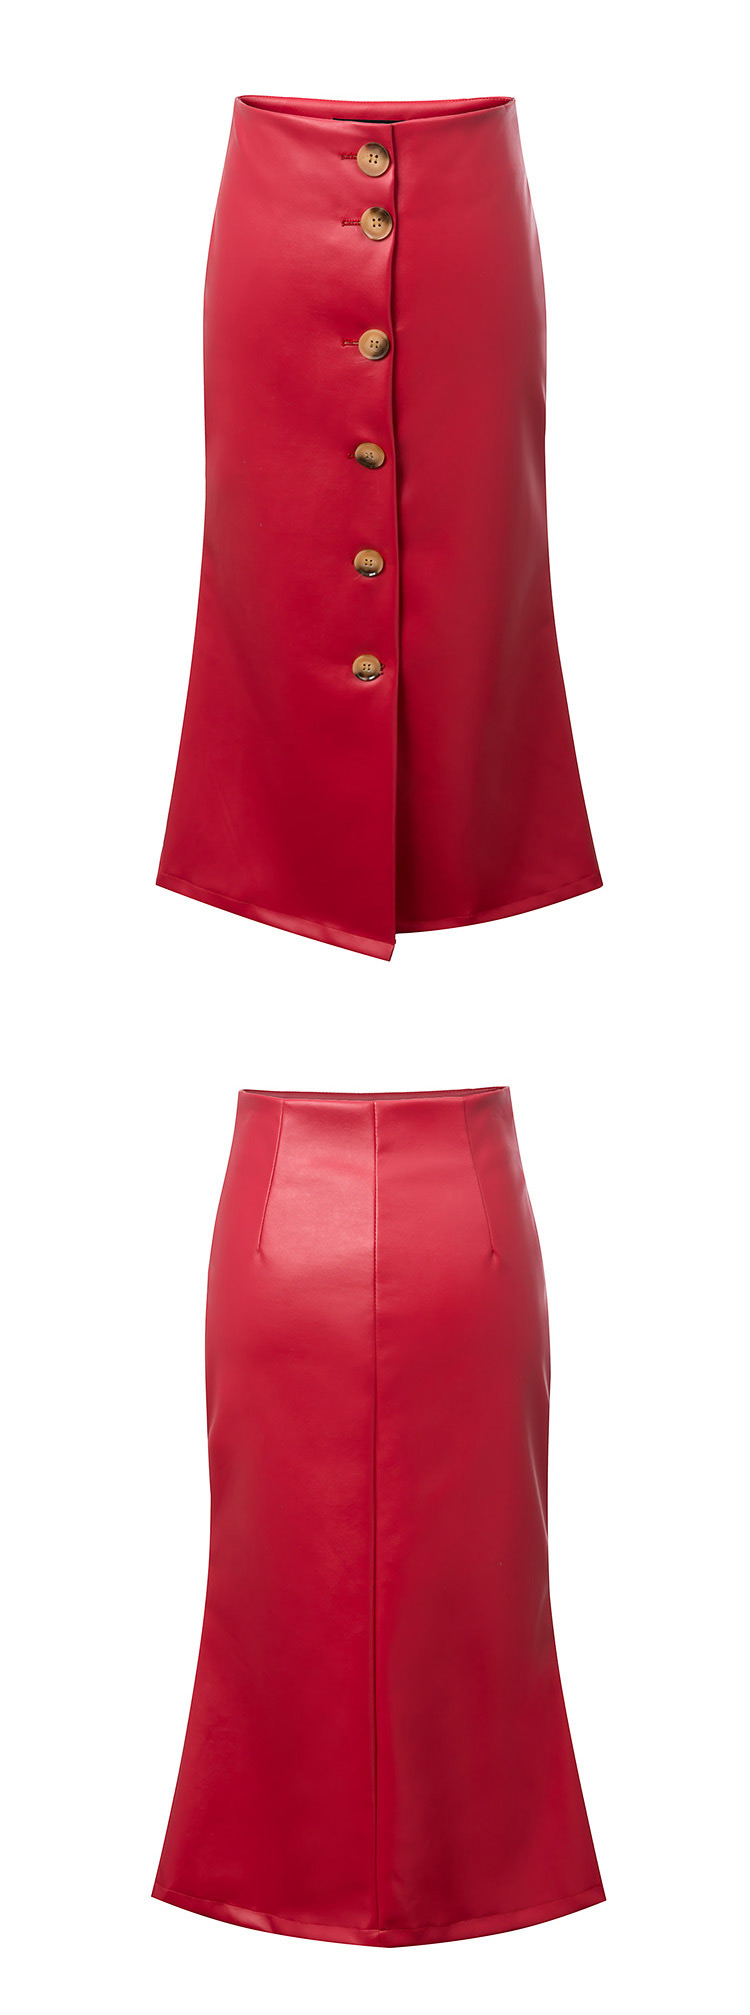 Trendy Red Pure Color Decorated Single-breasted Skirt,Skirts